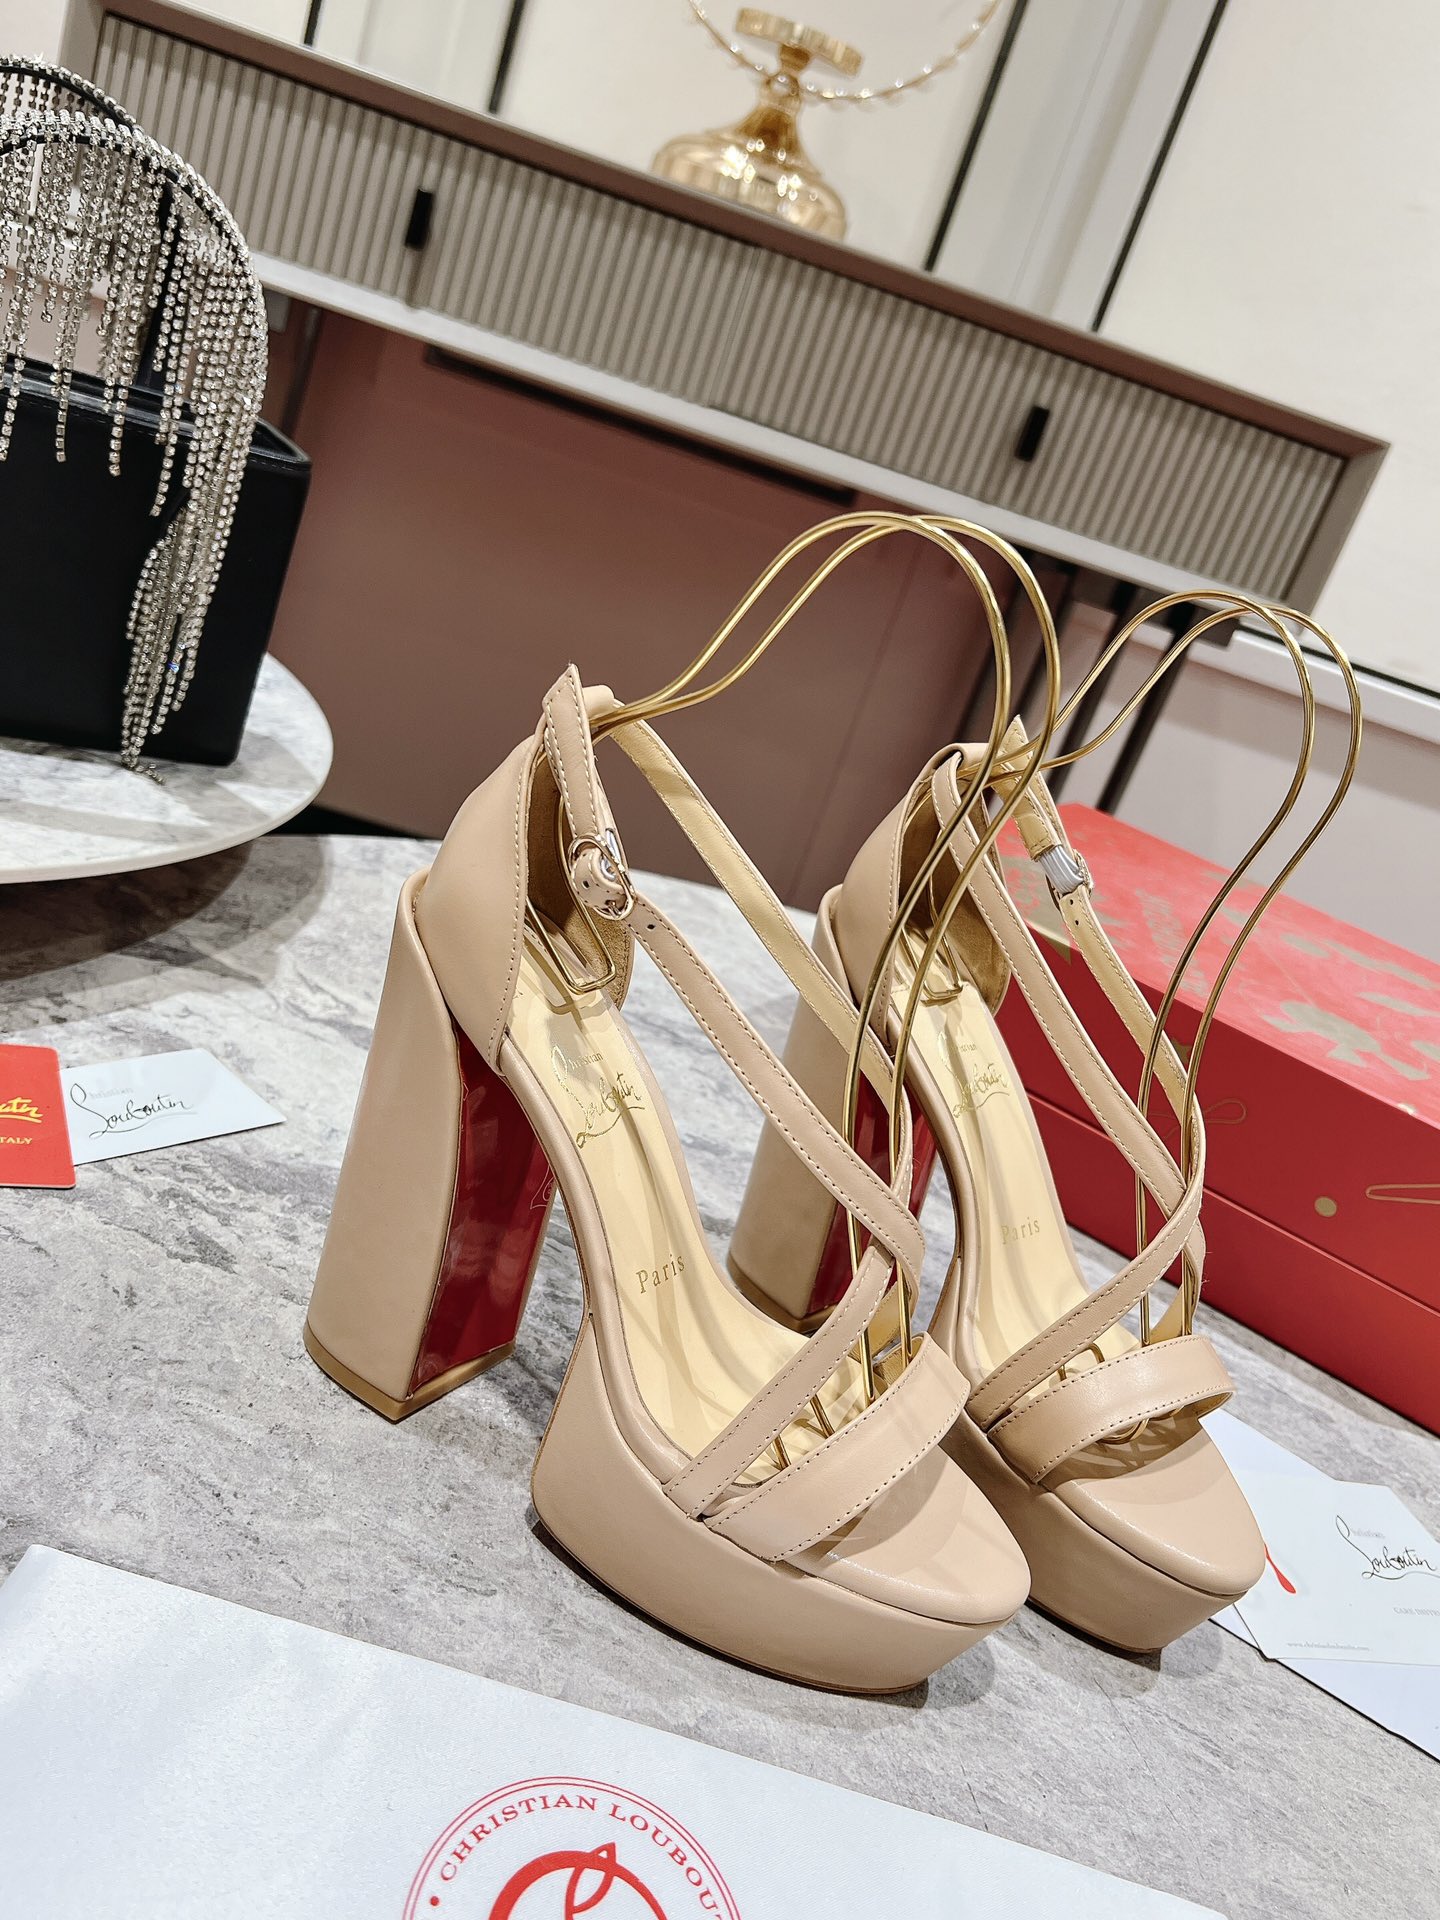 Store
 Christian Louboutin Buy Shoes High Heel Pumps Sandals Black Calfskin Cowhide Patent Leather